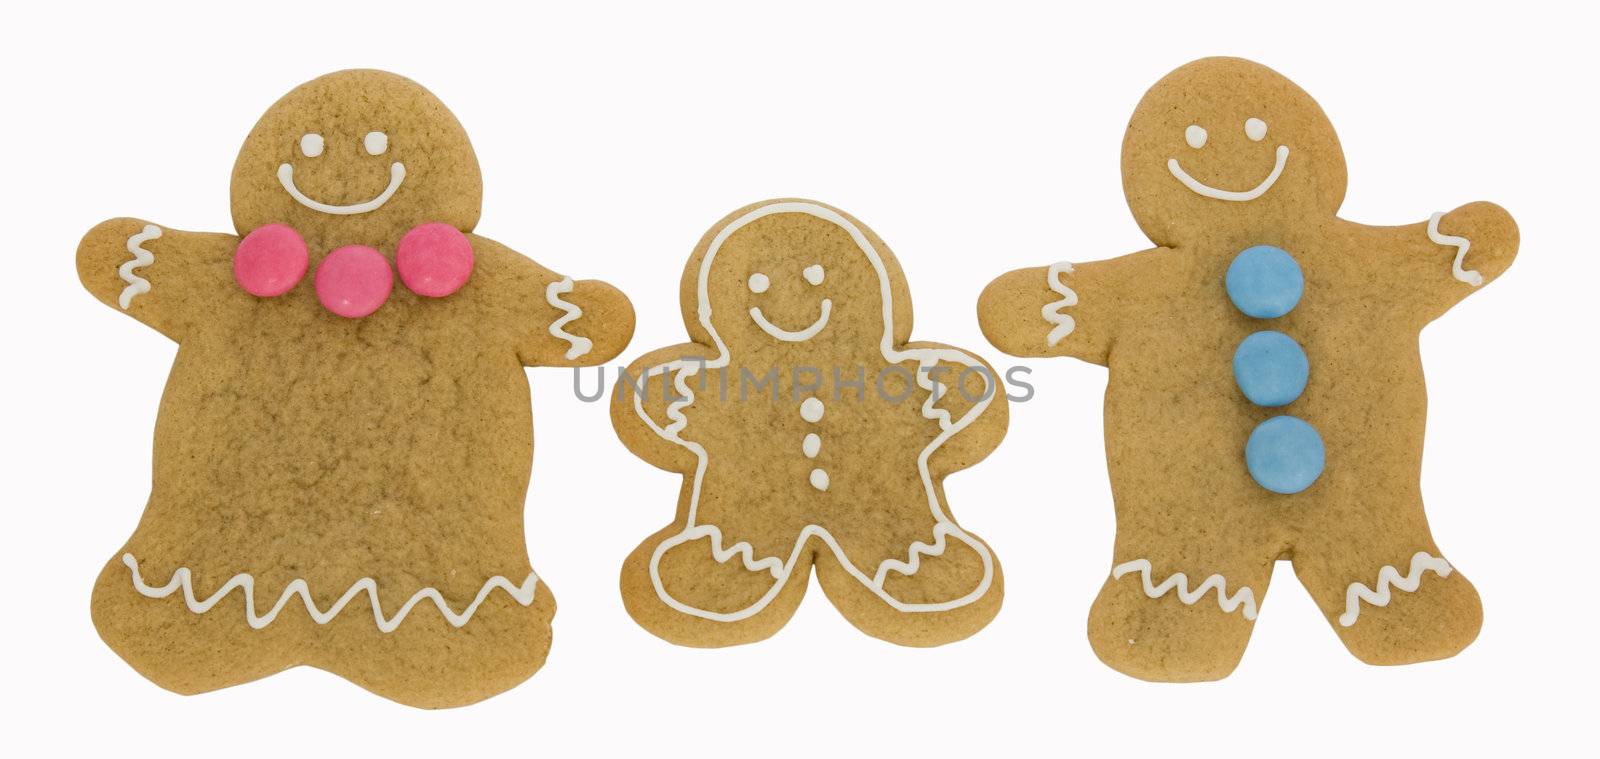 Gingerbread family by RuthBlack